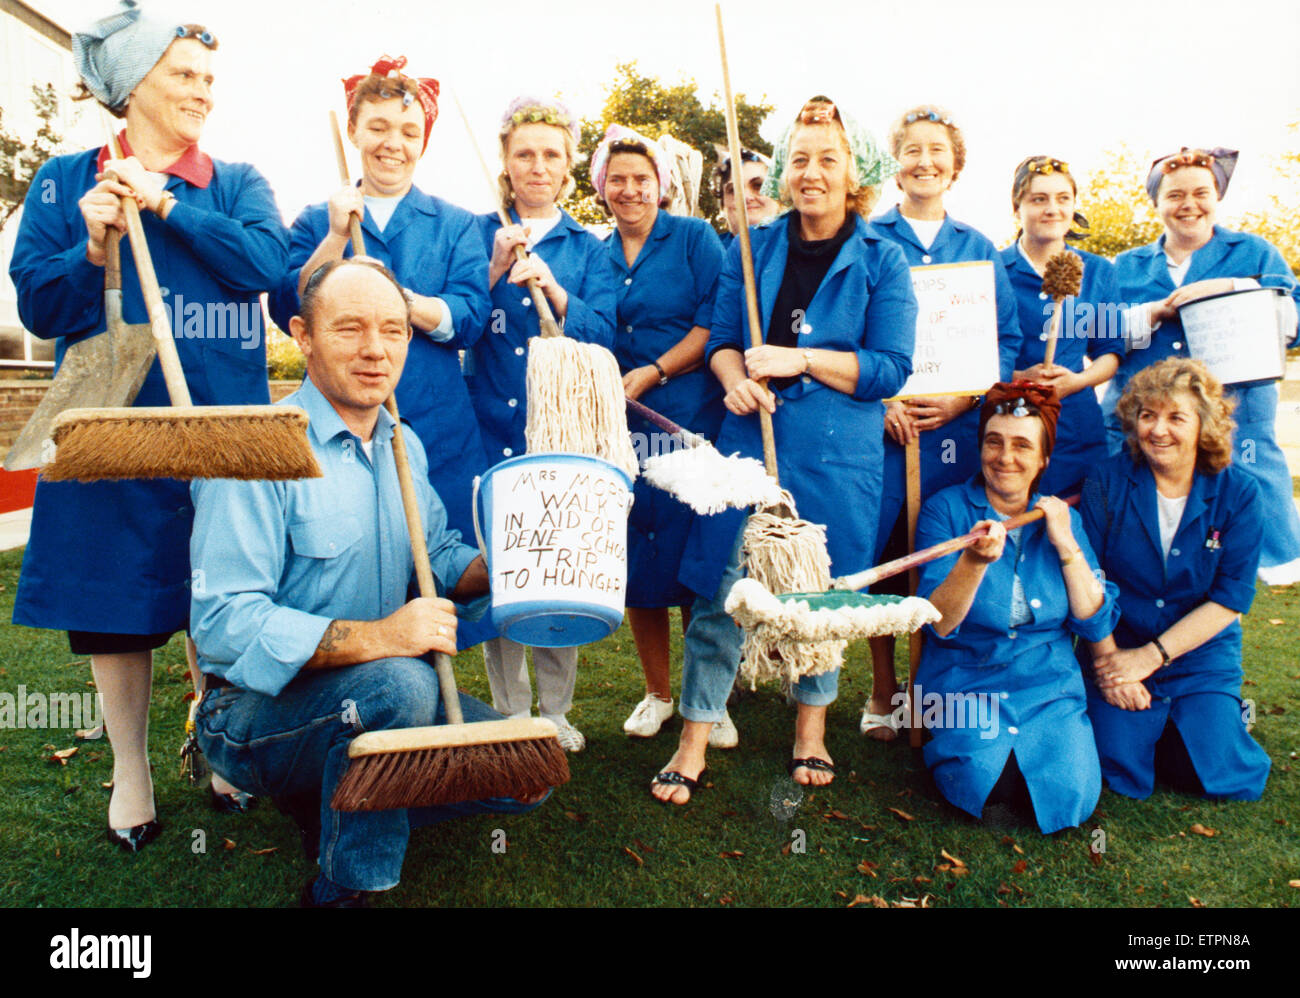 Cleaners from Dene School, Thornaby, were armed with their mops and brooms when they set off on the March of the Mops to raise money for the school choir Hungary fund. Seen with them is school caretaker Ken Brown. 12th October 1989. Stock Photo